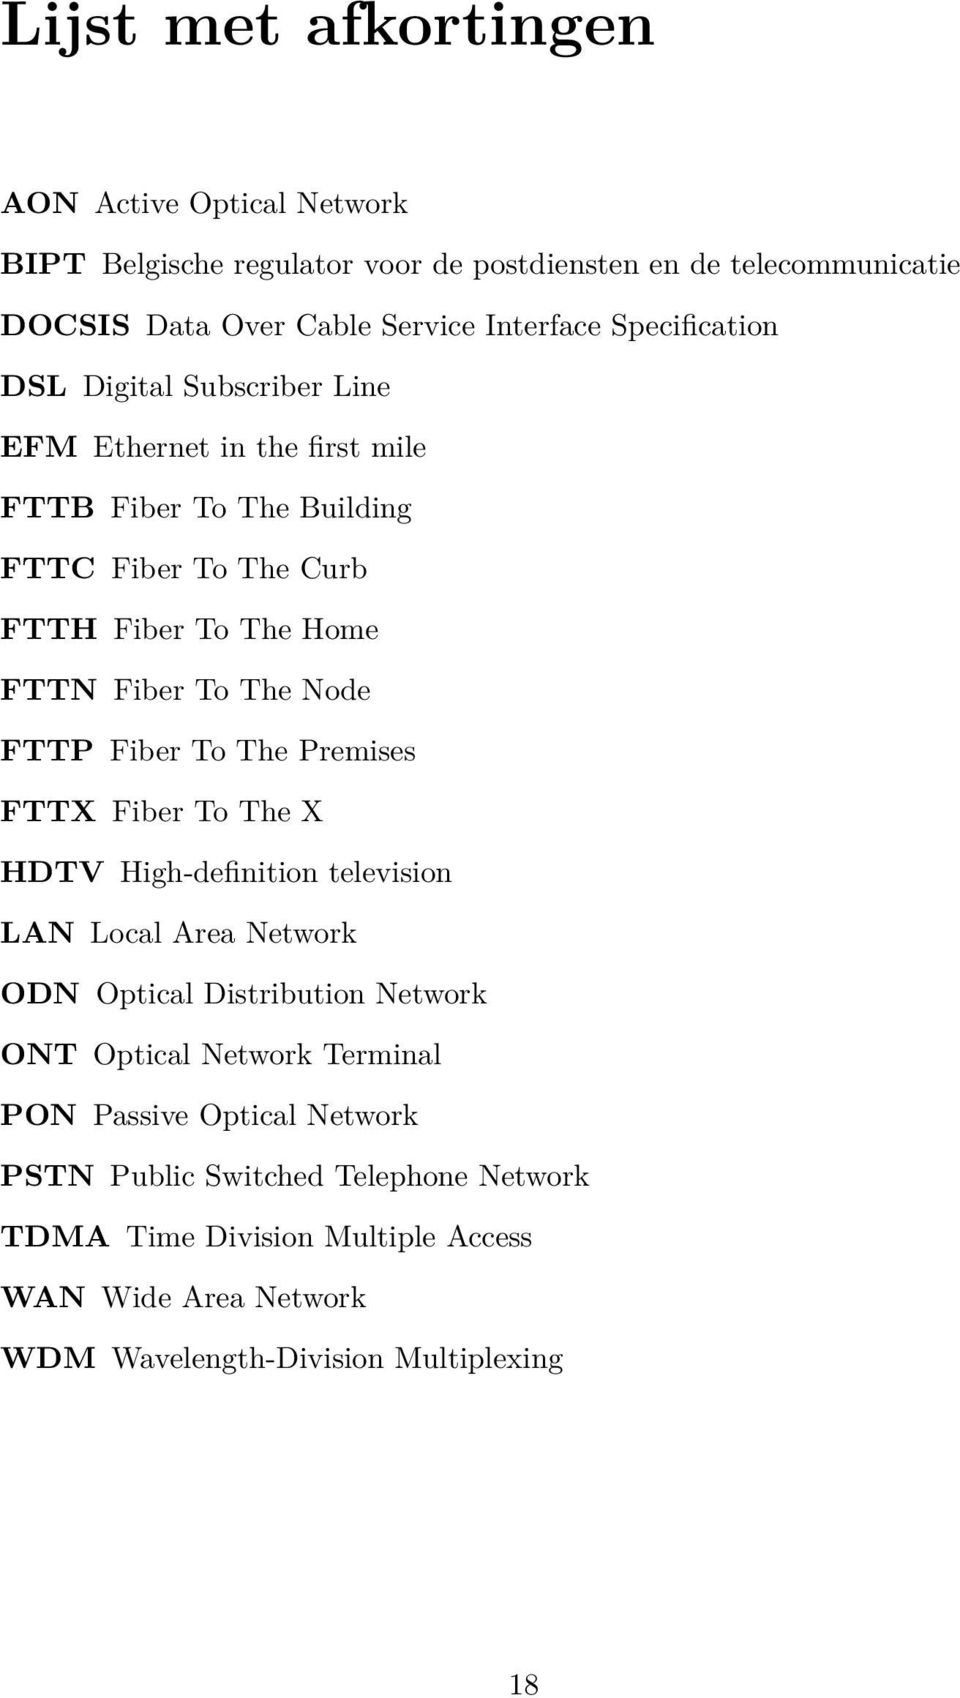 Node FTTP Fiber To The Premises FTTX Fiber To The X HDTV High-definition television LAN Local Area Network ODN Optical Distribution Network ONT Optical Network